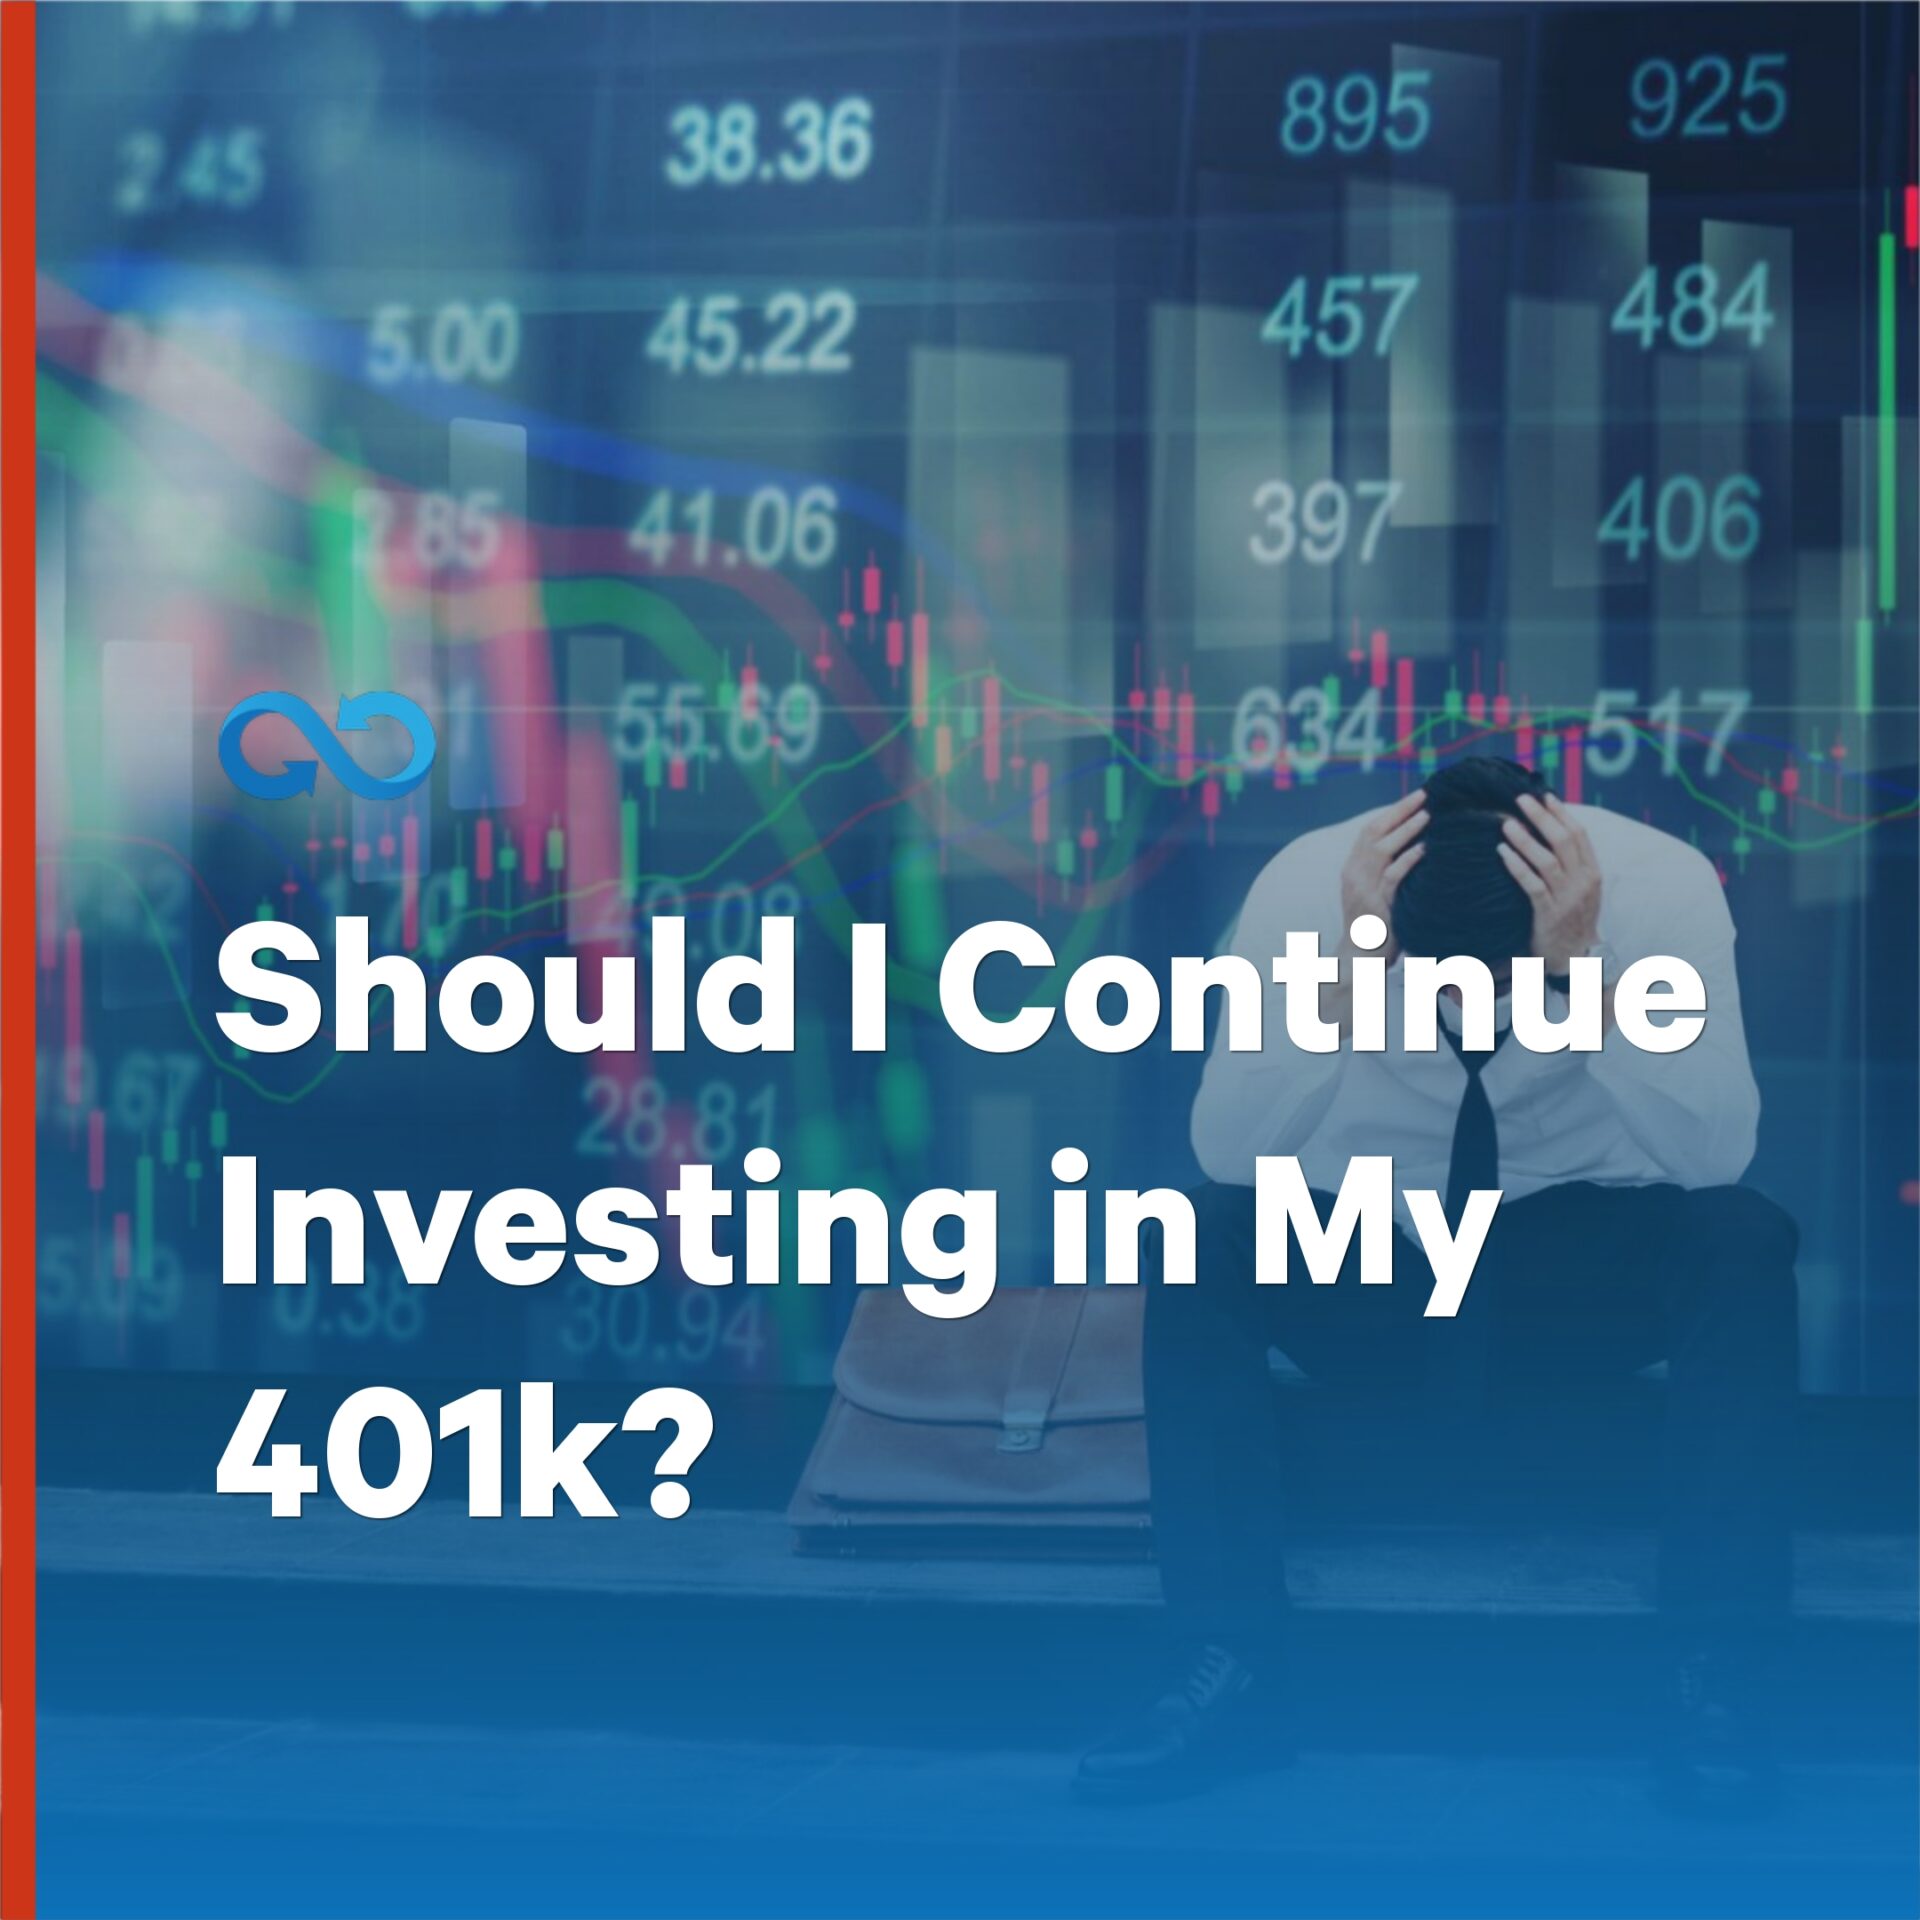 Should I Continue Investing in My 401k?